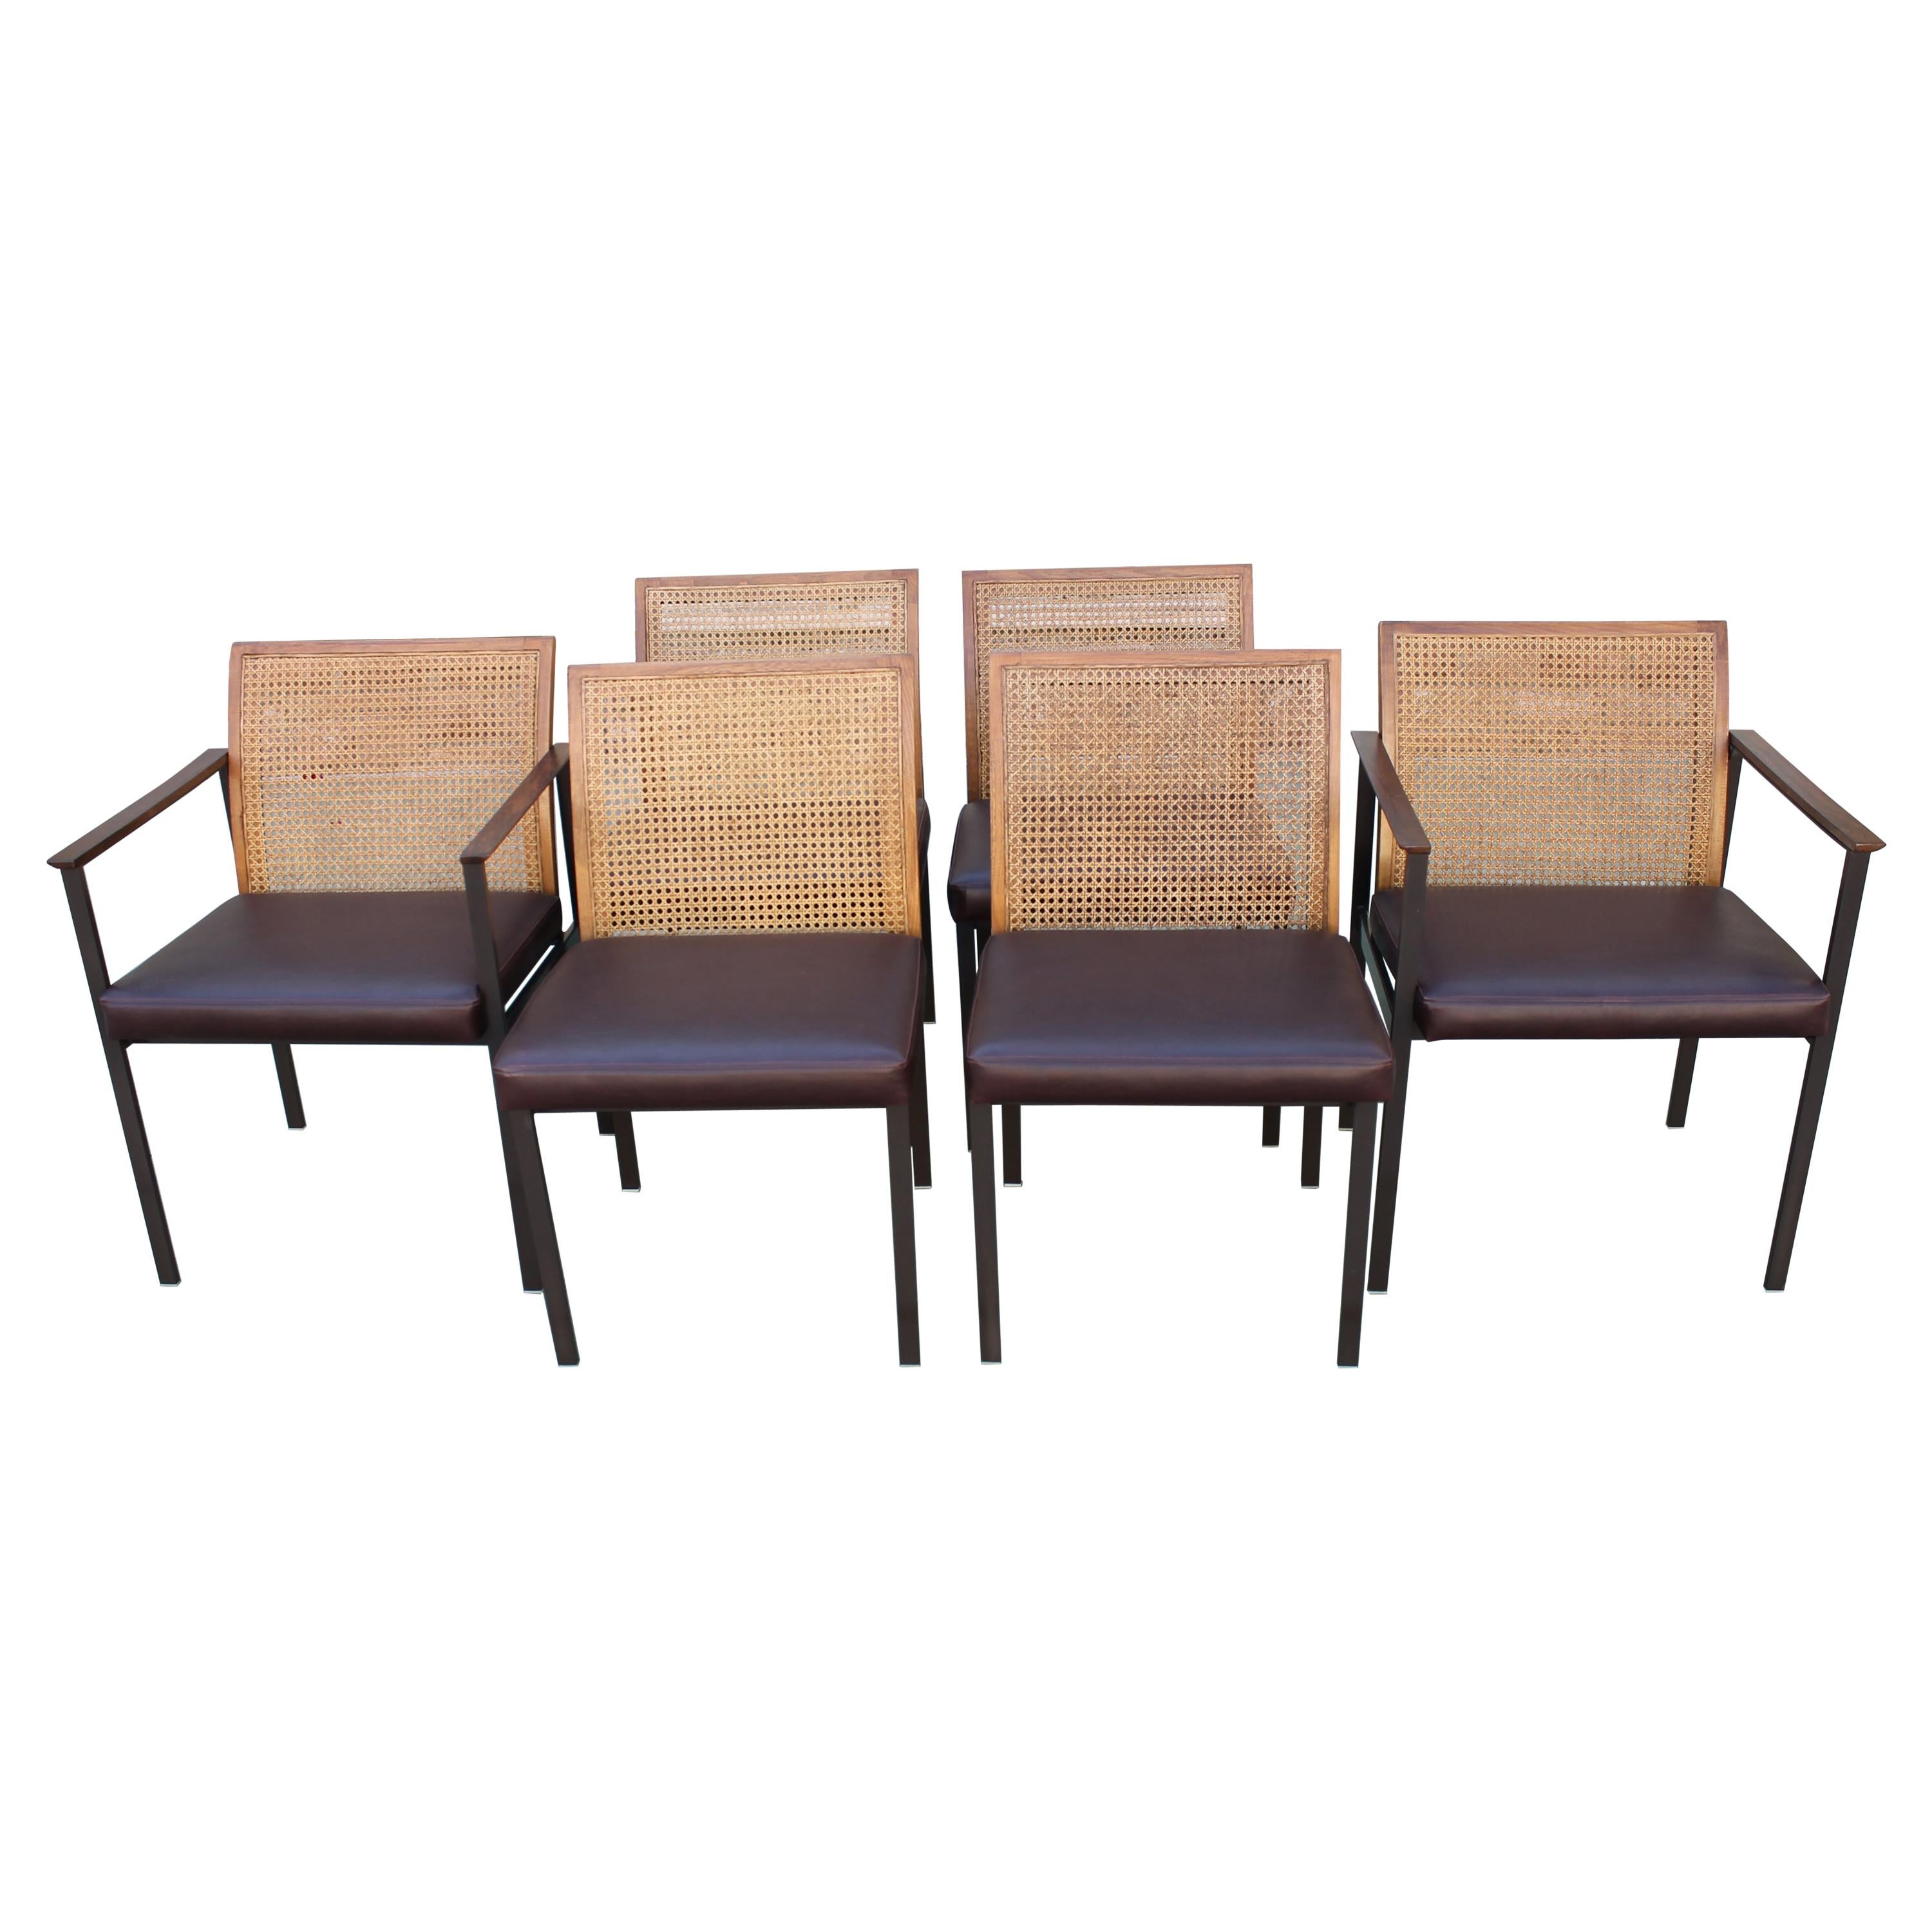 Six Mid-Century Modern Dining Chairs by Lane Furniture